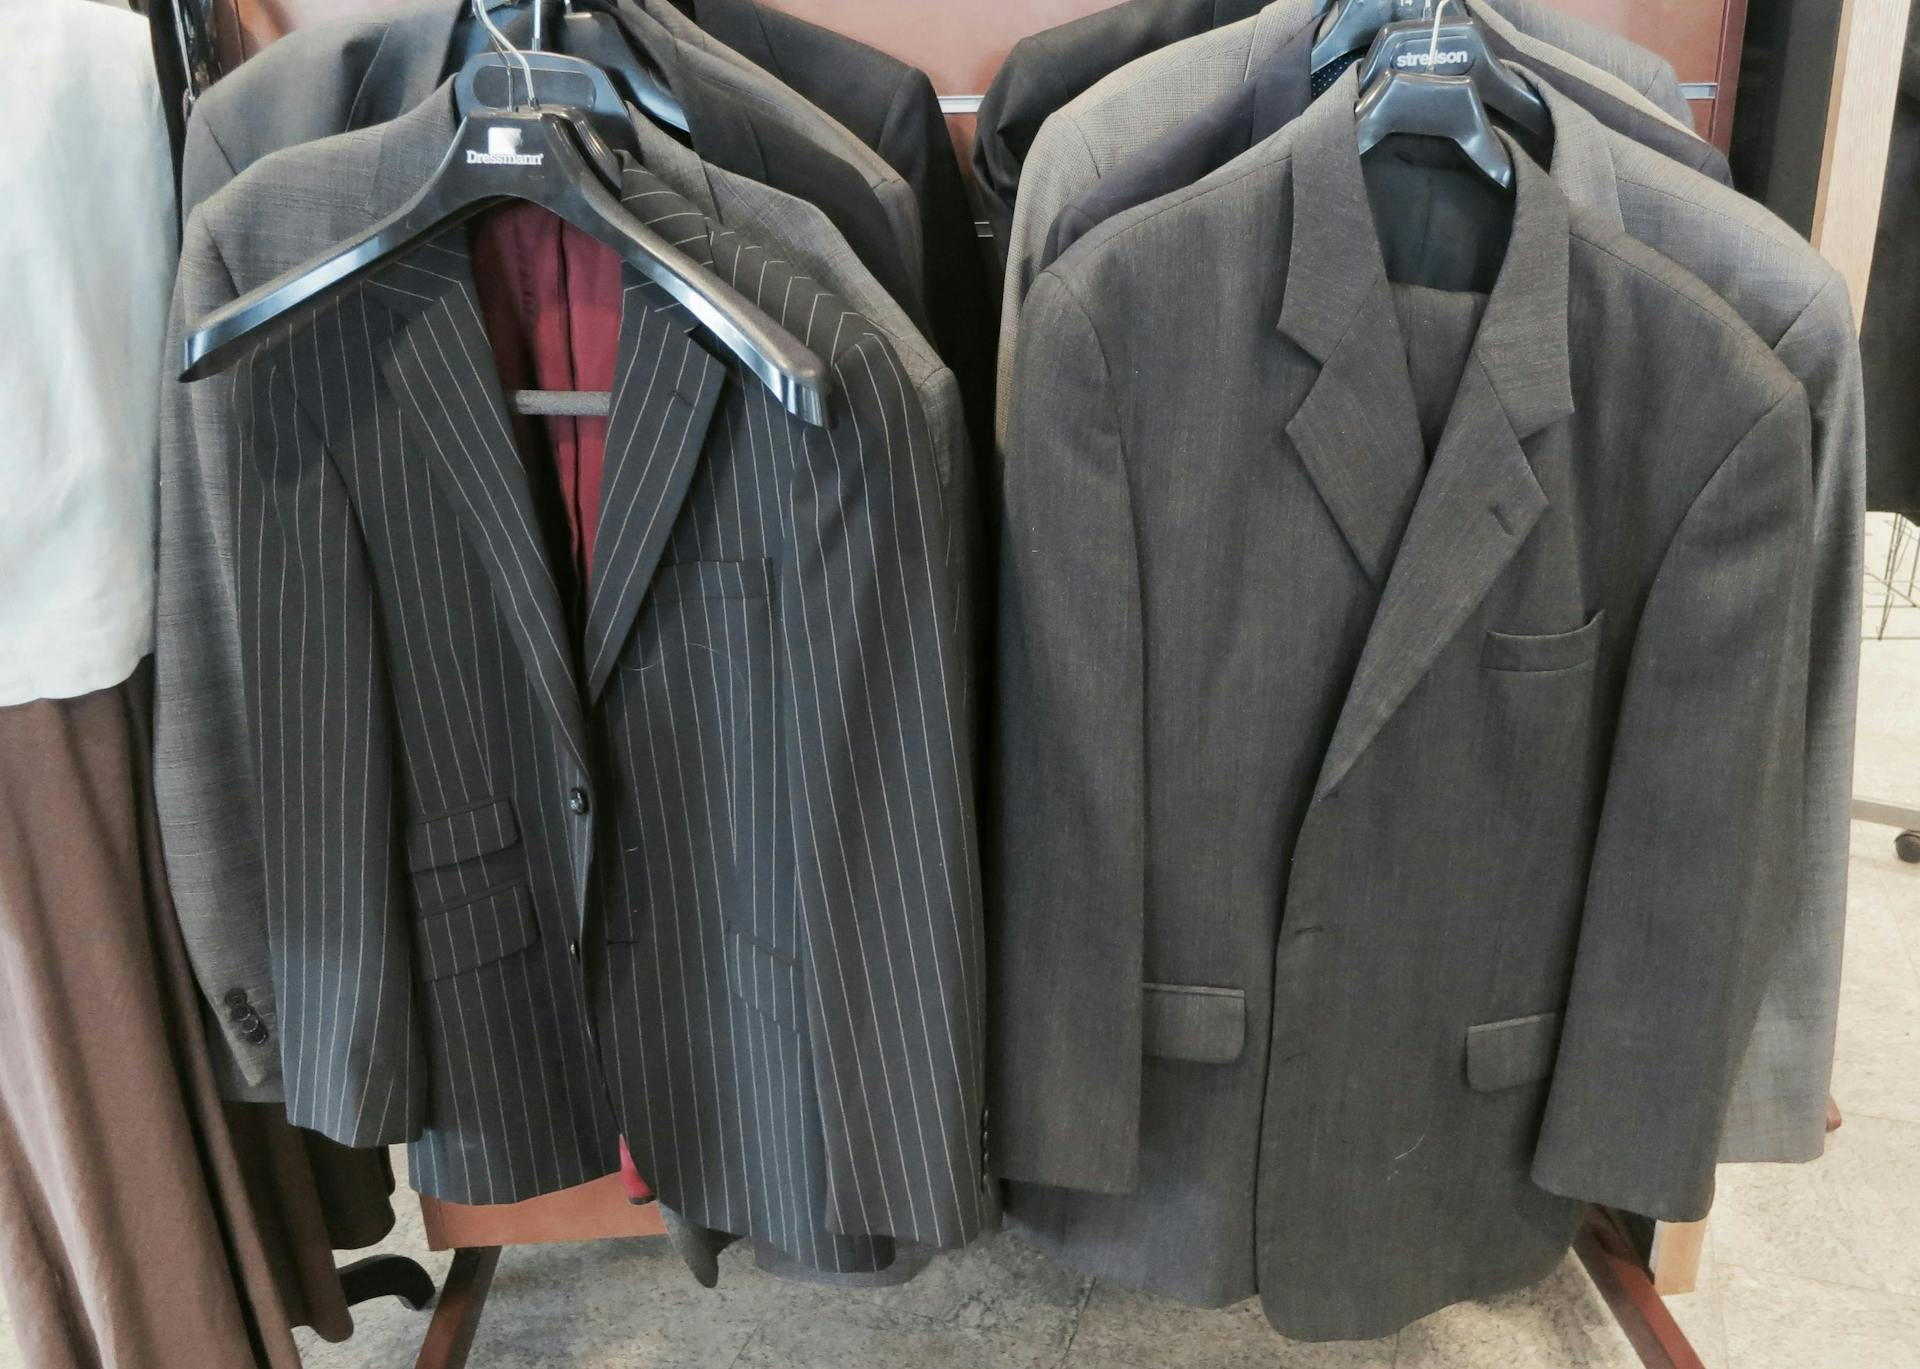 Men's suits hanging on racks in a thrift store in Reykjavik. 